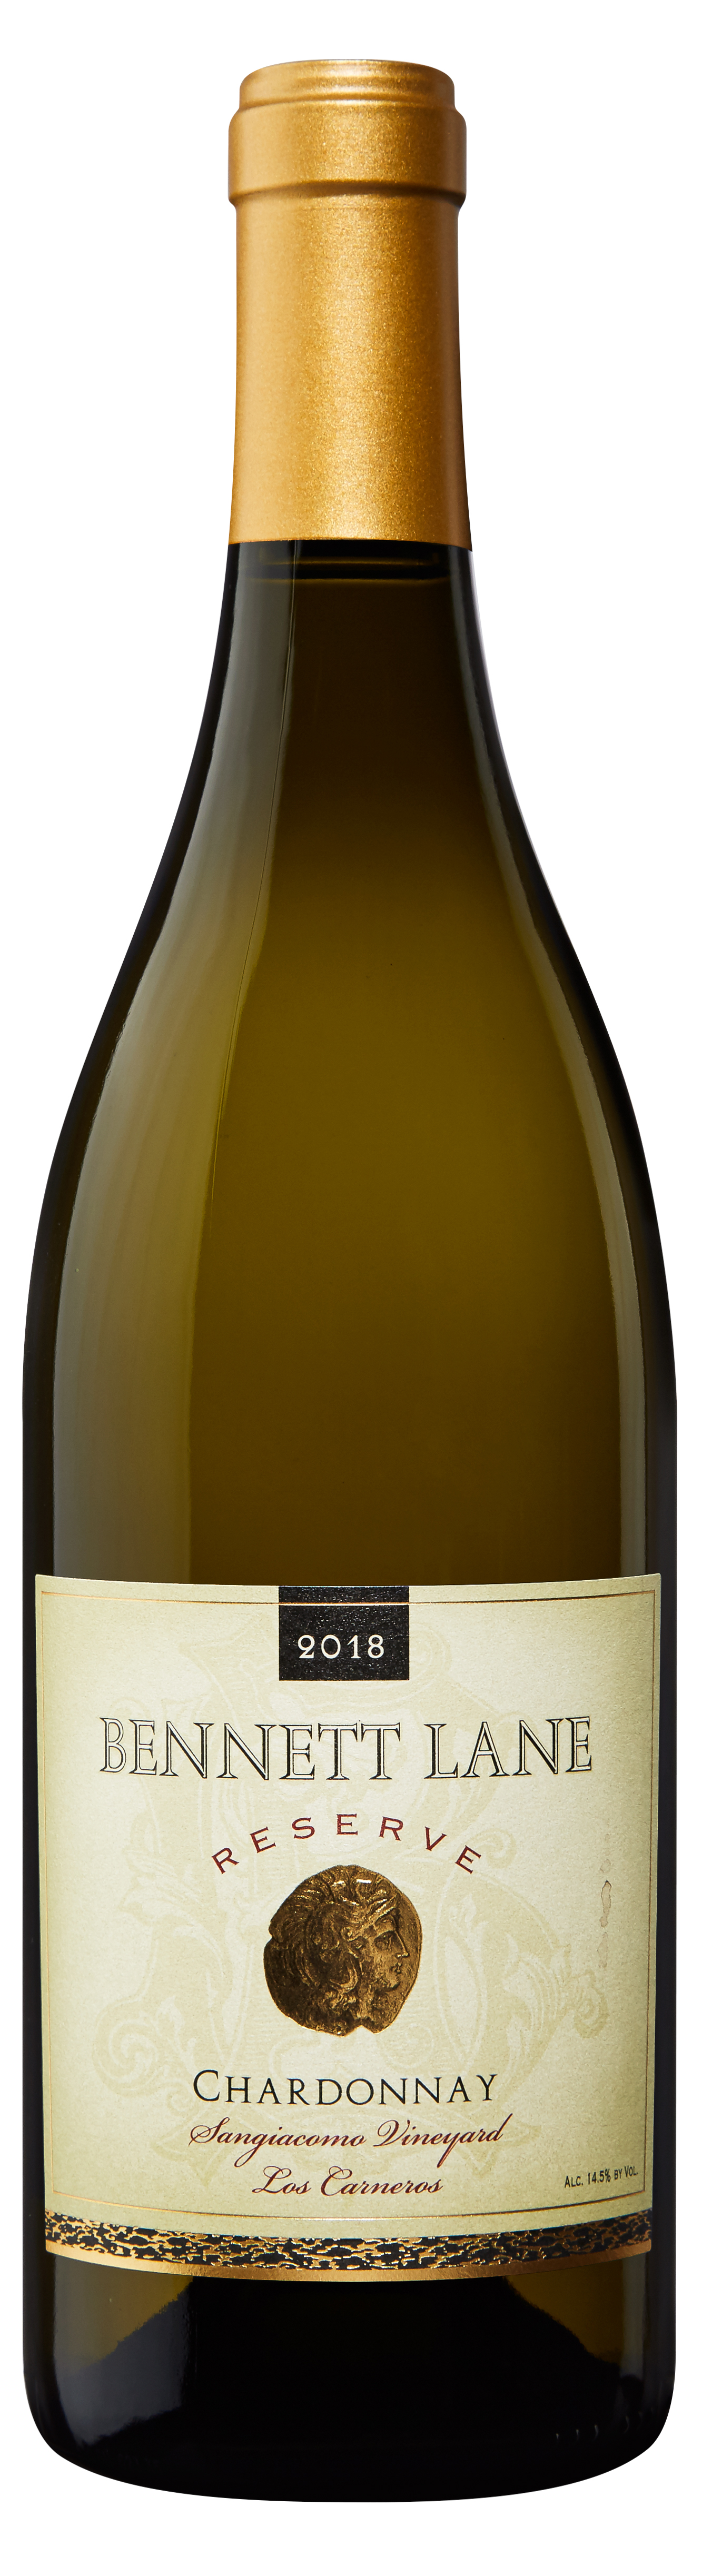 Product Image for 2021 Chardonnay